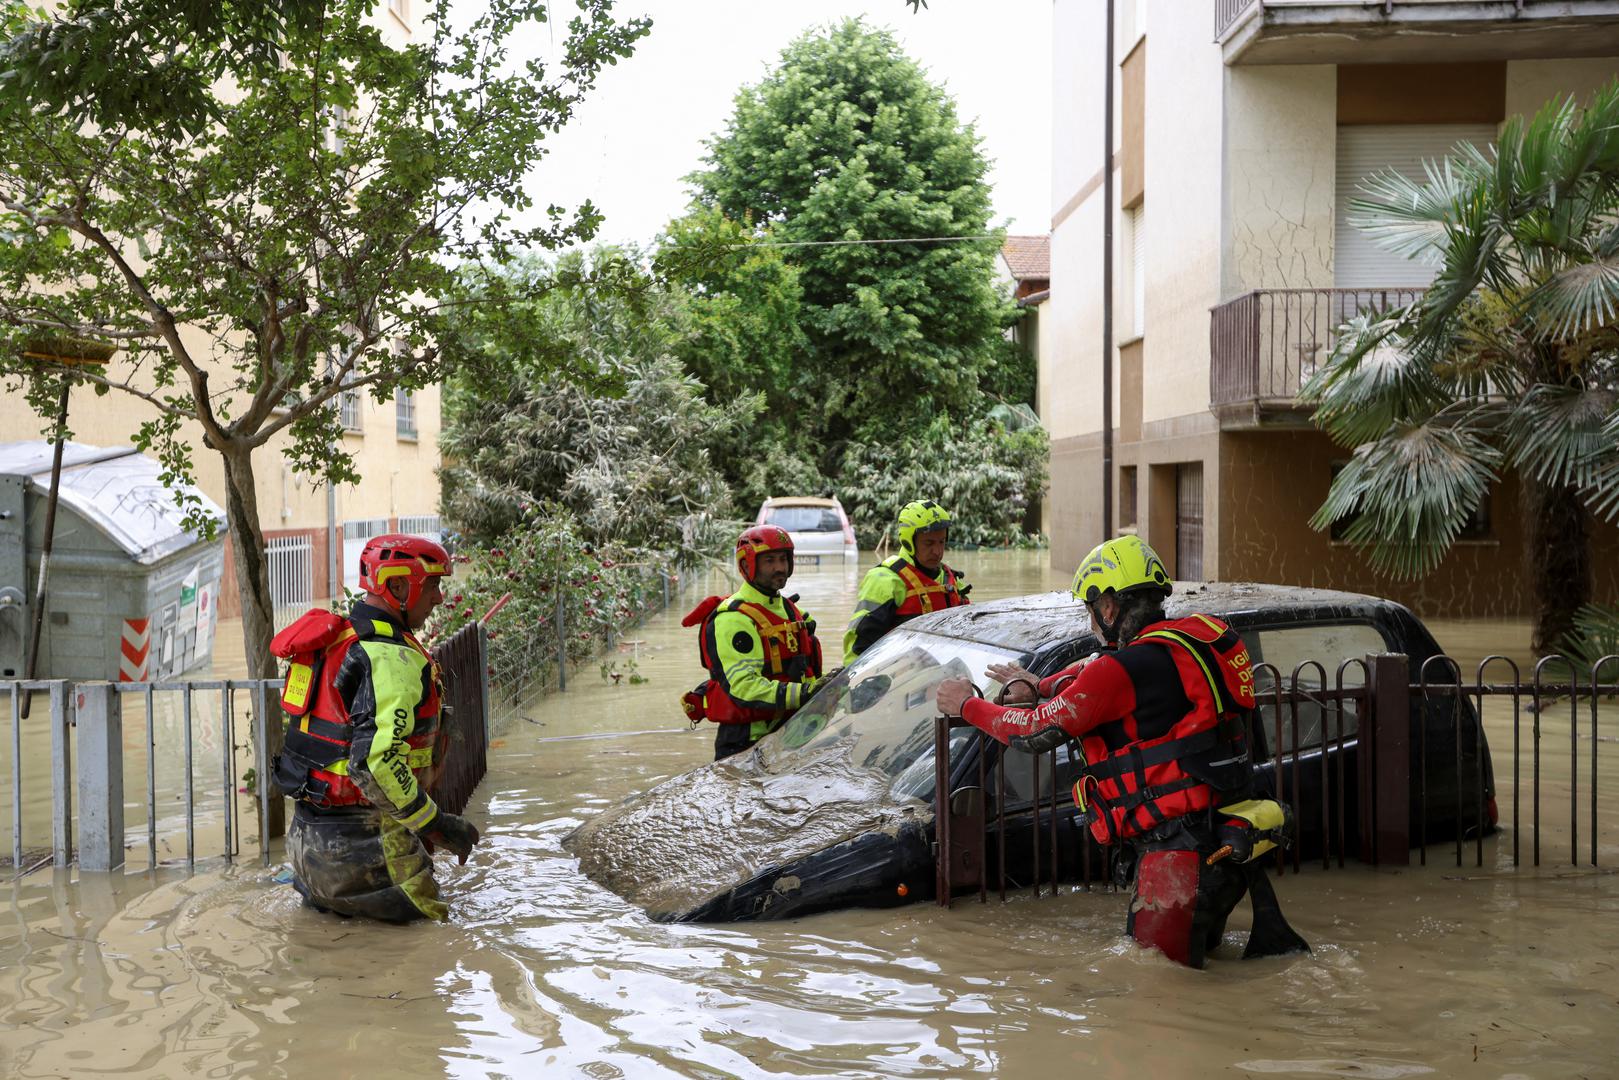 Firefighters work next to a flooded car, after heavy rains hit Italy's Emilia Romagna region, in Faenza, Italy, May 18, 2023. REUTERS/Claudia Greco Photo: CLAUDIA GRECO/REUTERS